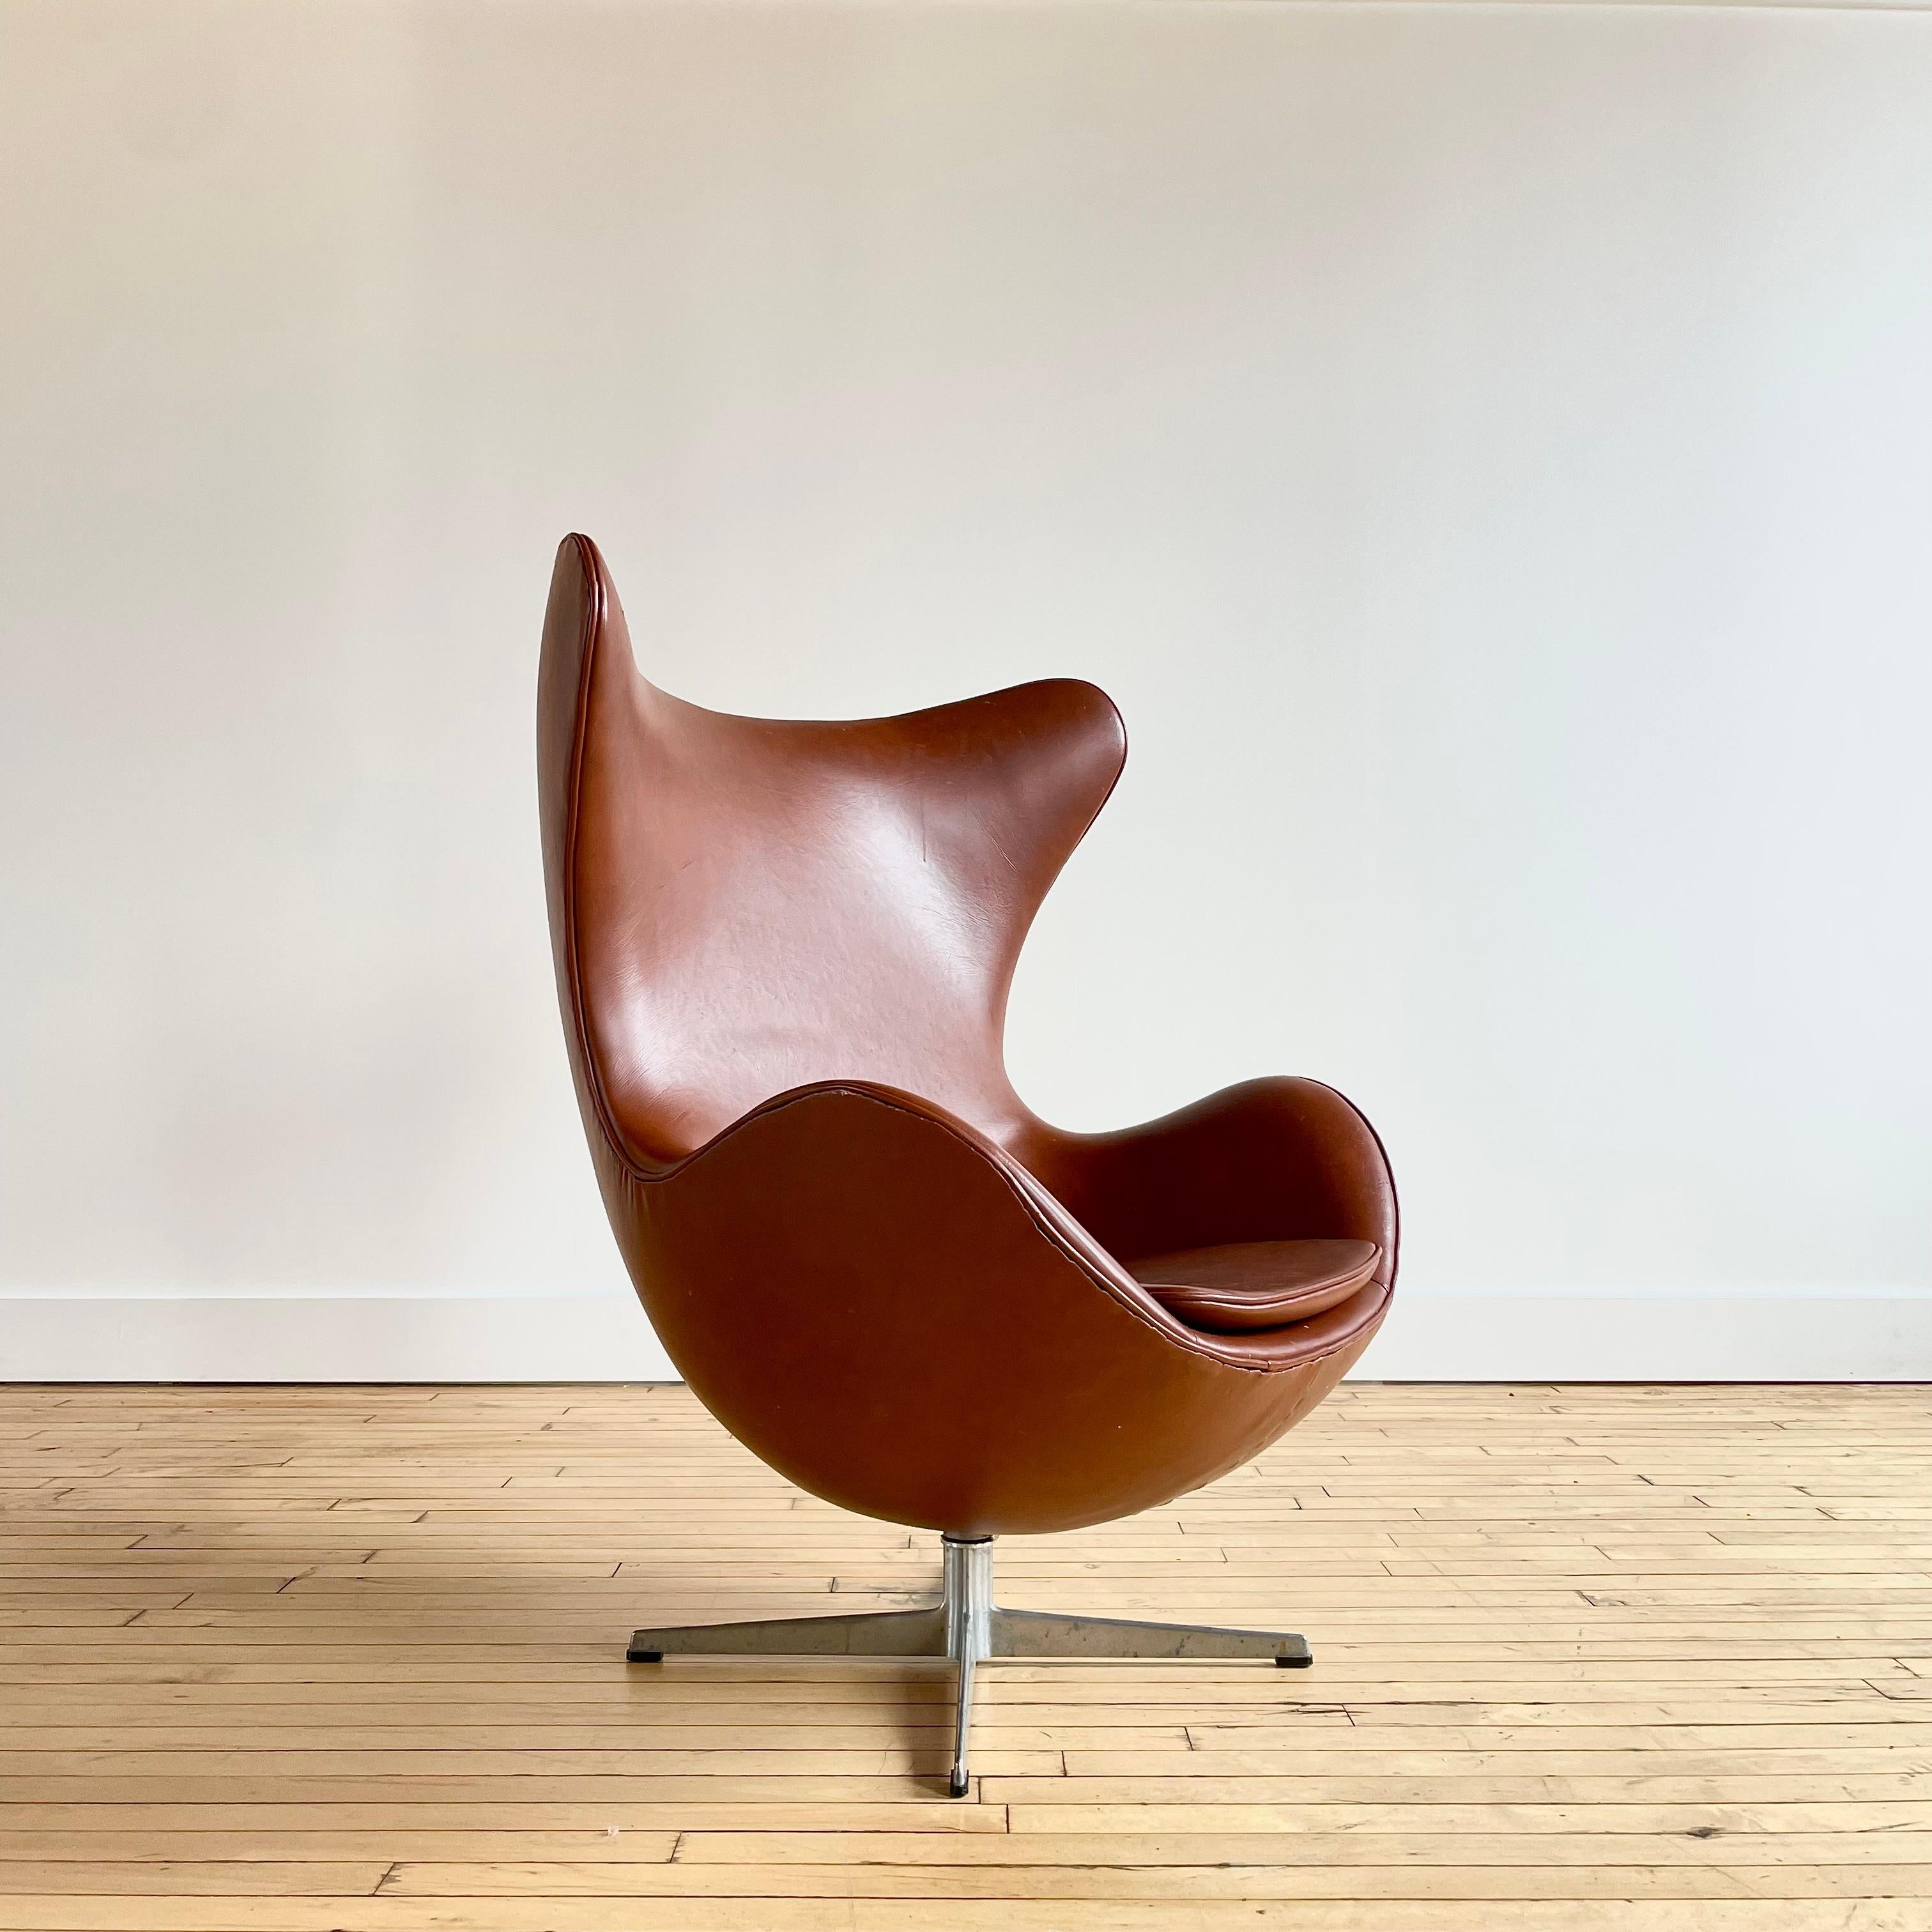 Authentic early example of the iconic Egg Chair by Arne Jacobsen. Fritz Hansen signature (FH Made in Denmark) is etched into the base. 

This chair features cognac upholstery in what appears to be vinyl. I am not sure if this is the original